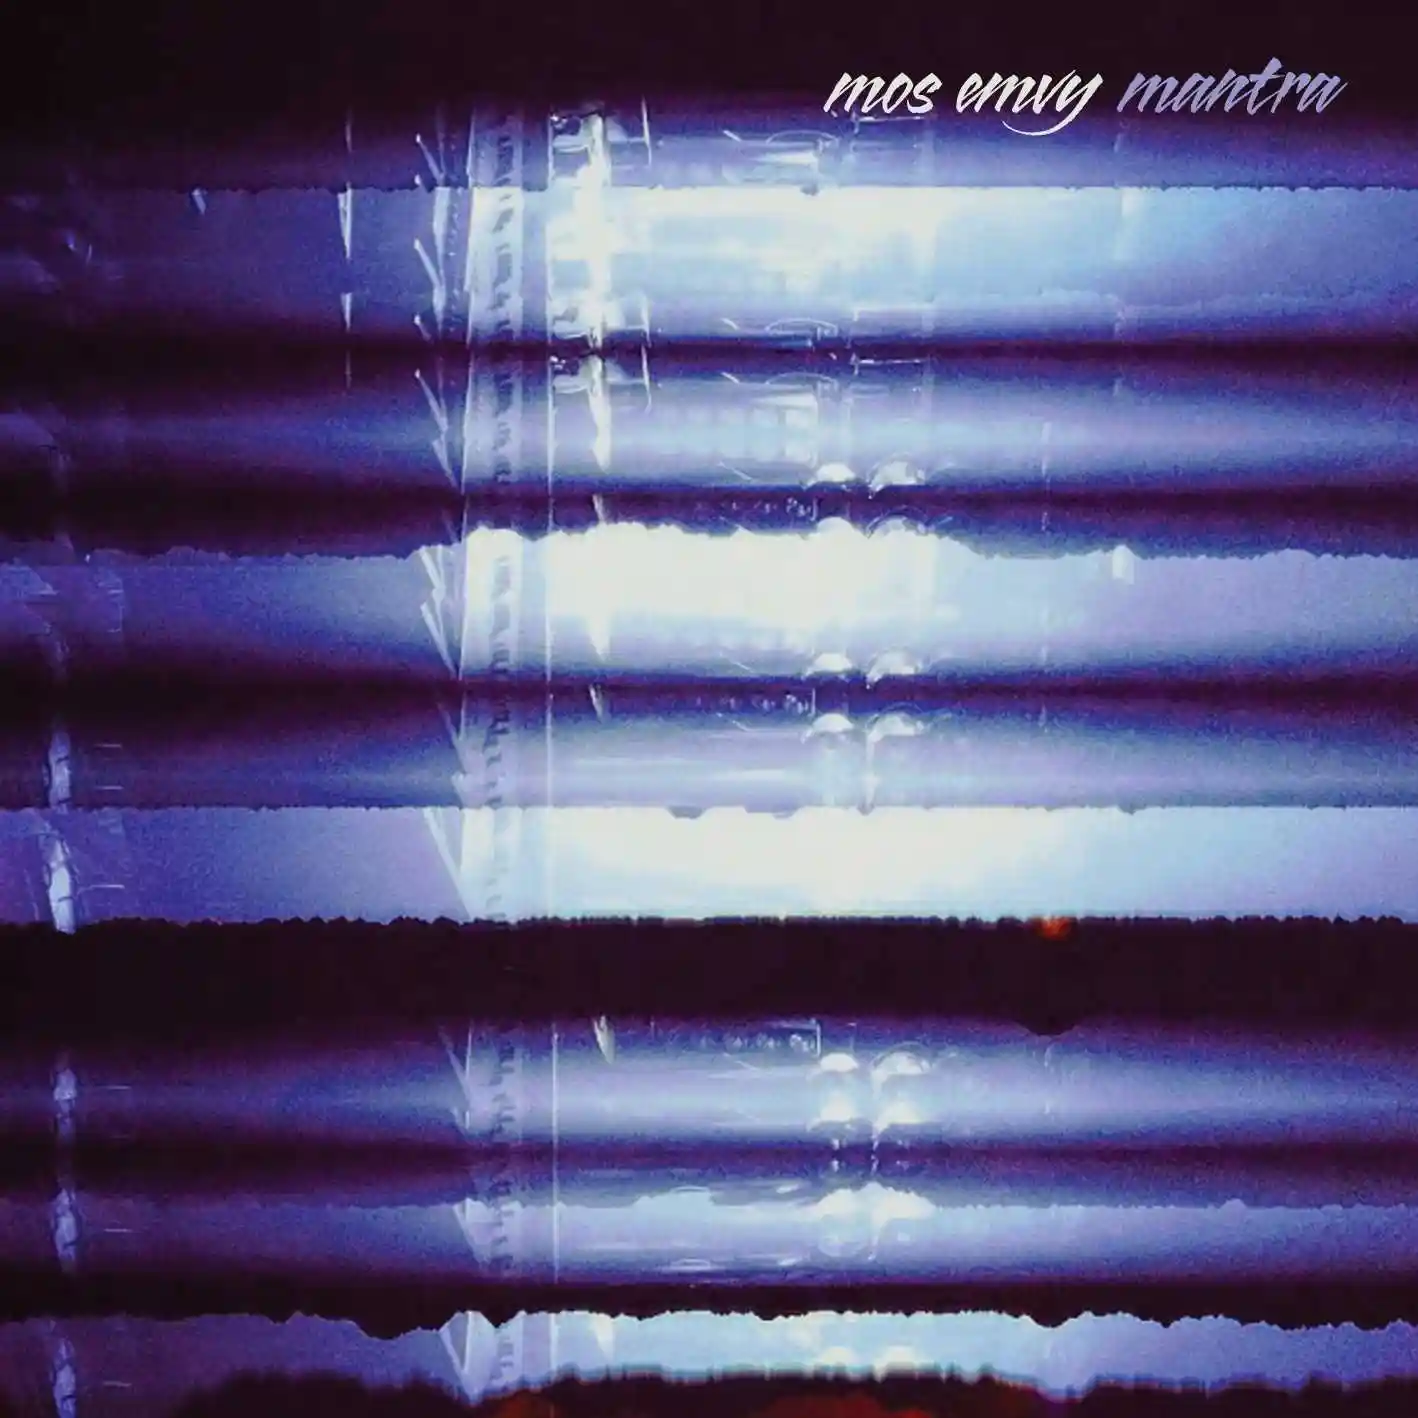 Album cover for “Mantra” by Mos Emvy